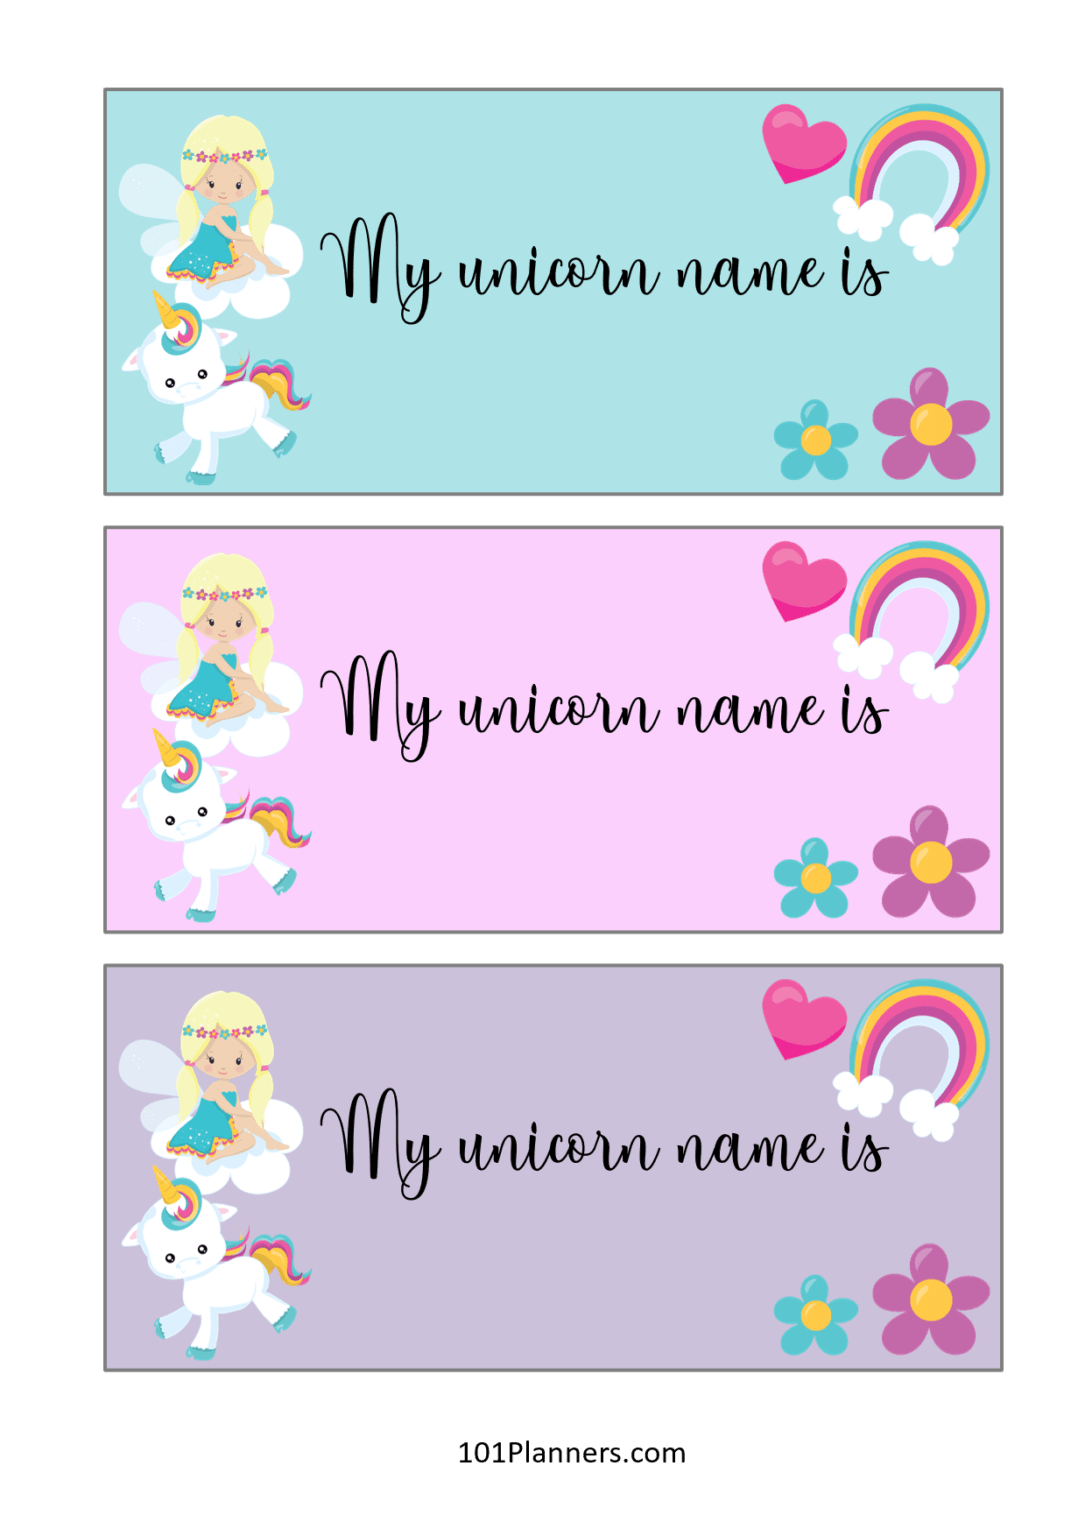 Whats Your Unicorn Name A Unique Name Generator Thats Fun To Use 8267